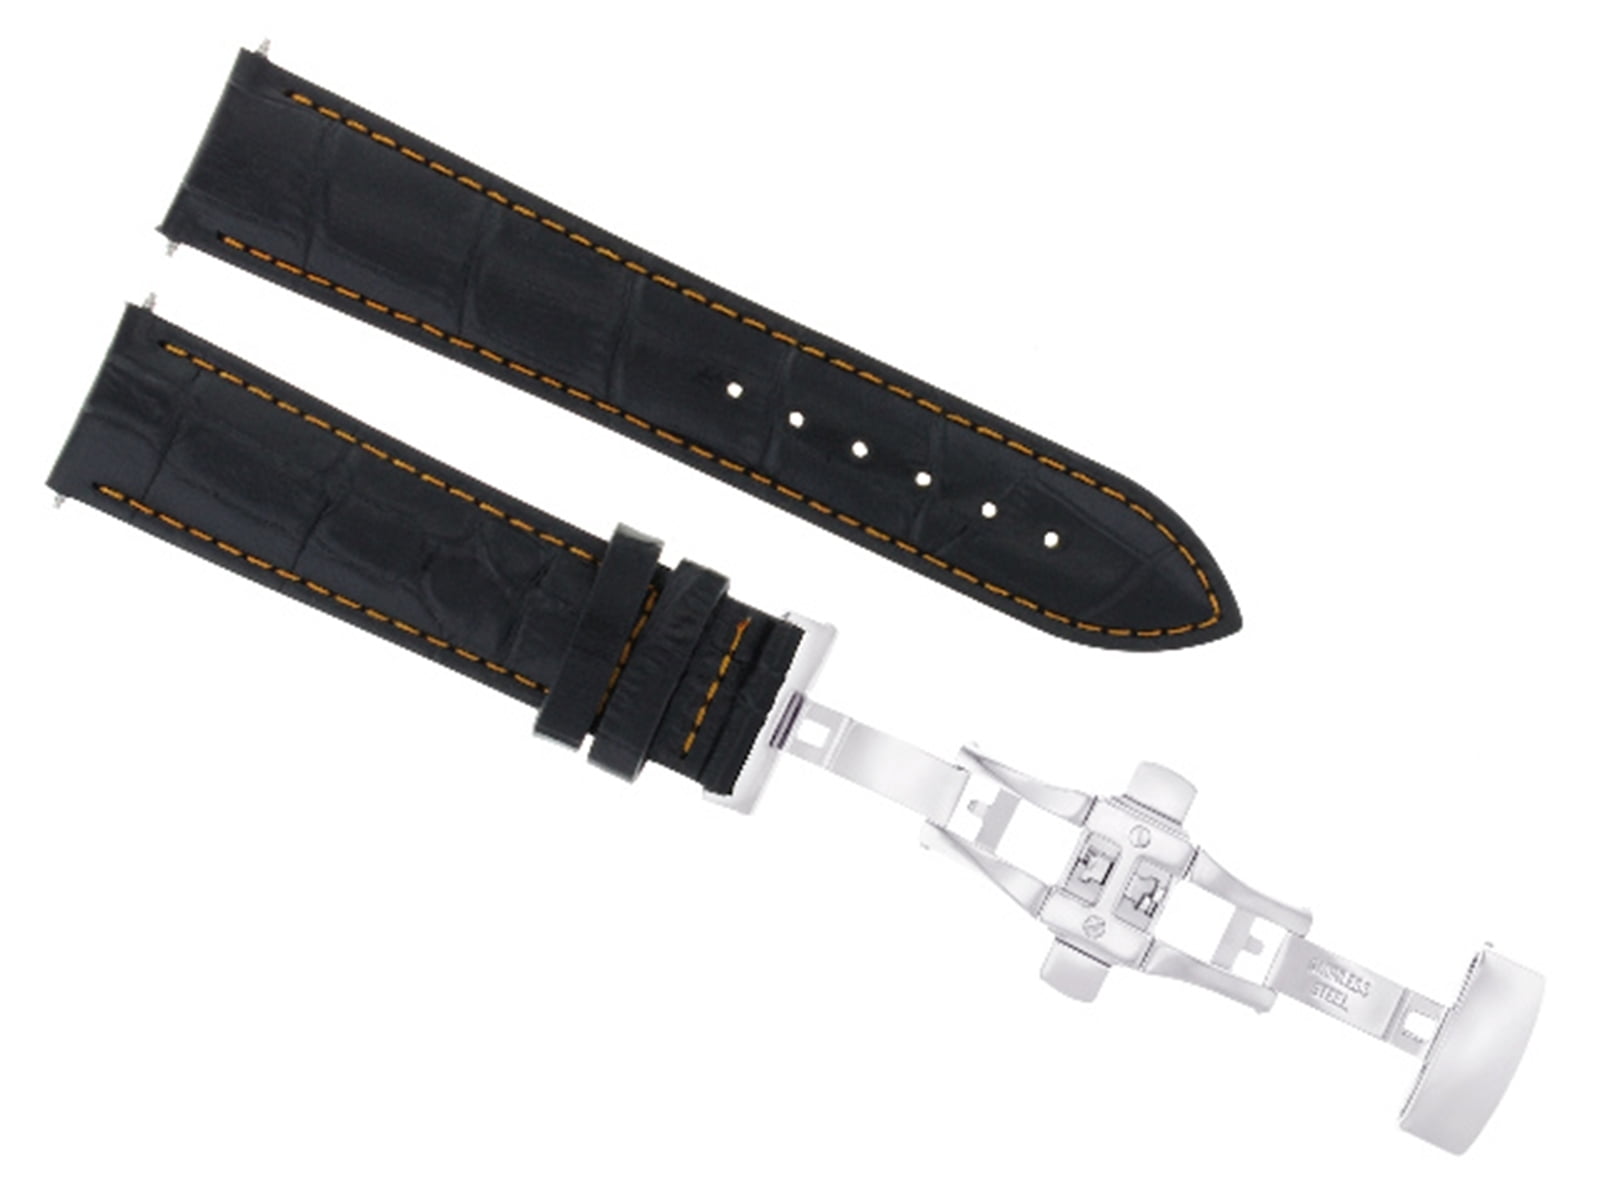 20mm Brown Leather Watch Bands Strap Replacement for Seiko Presage